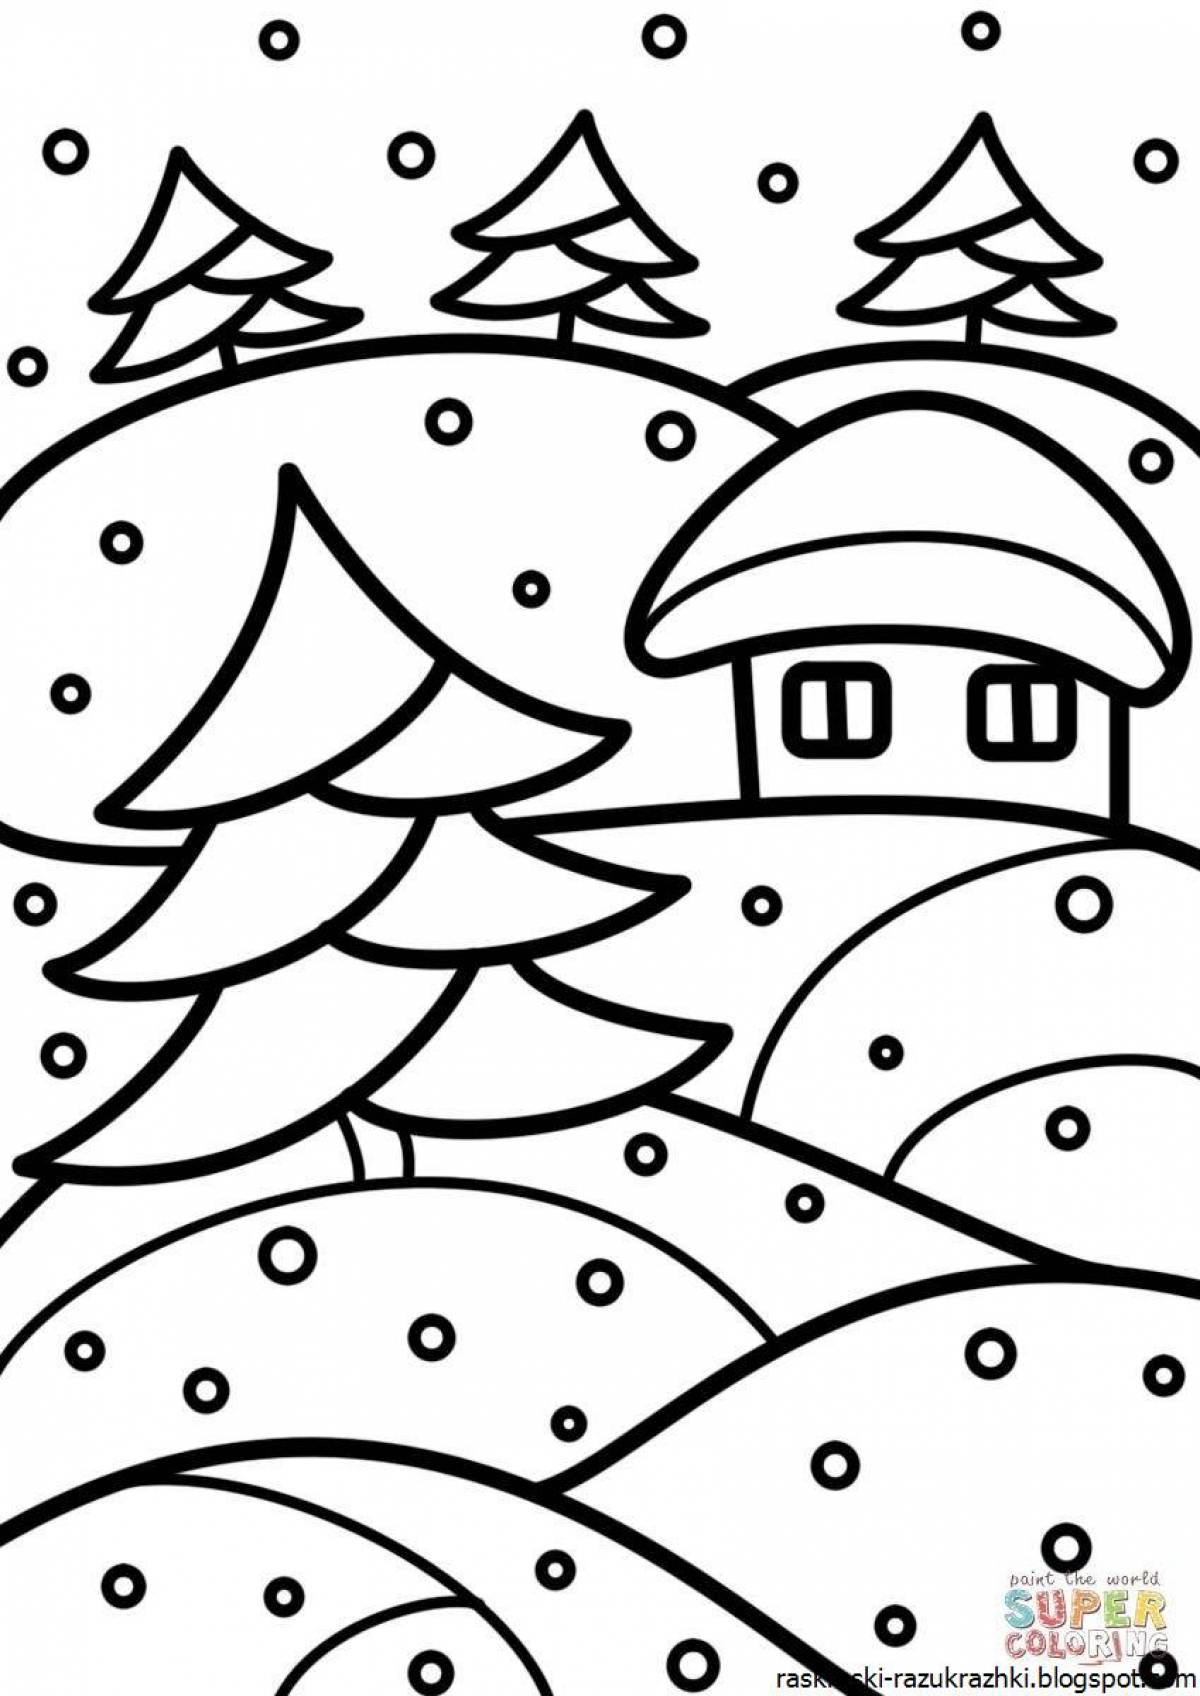 Exciting winter coloring book for kids